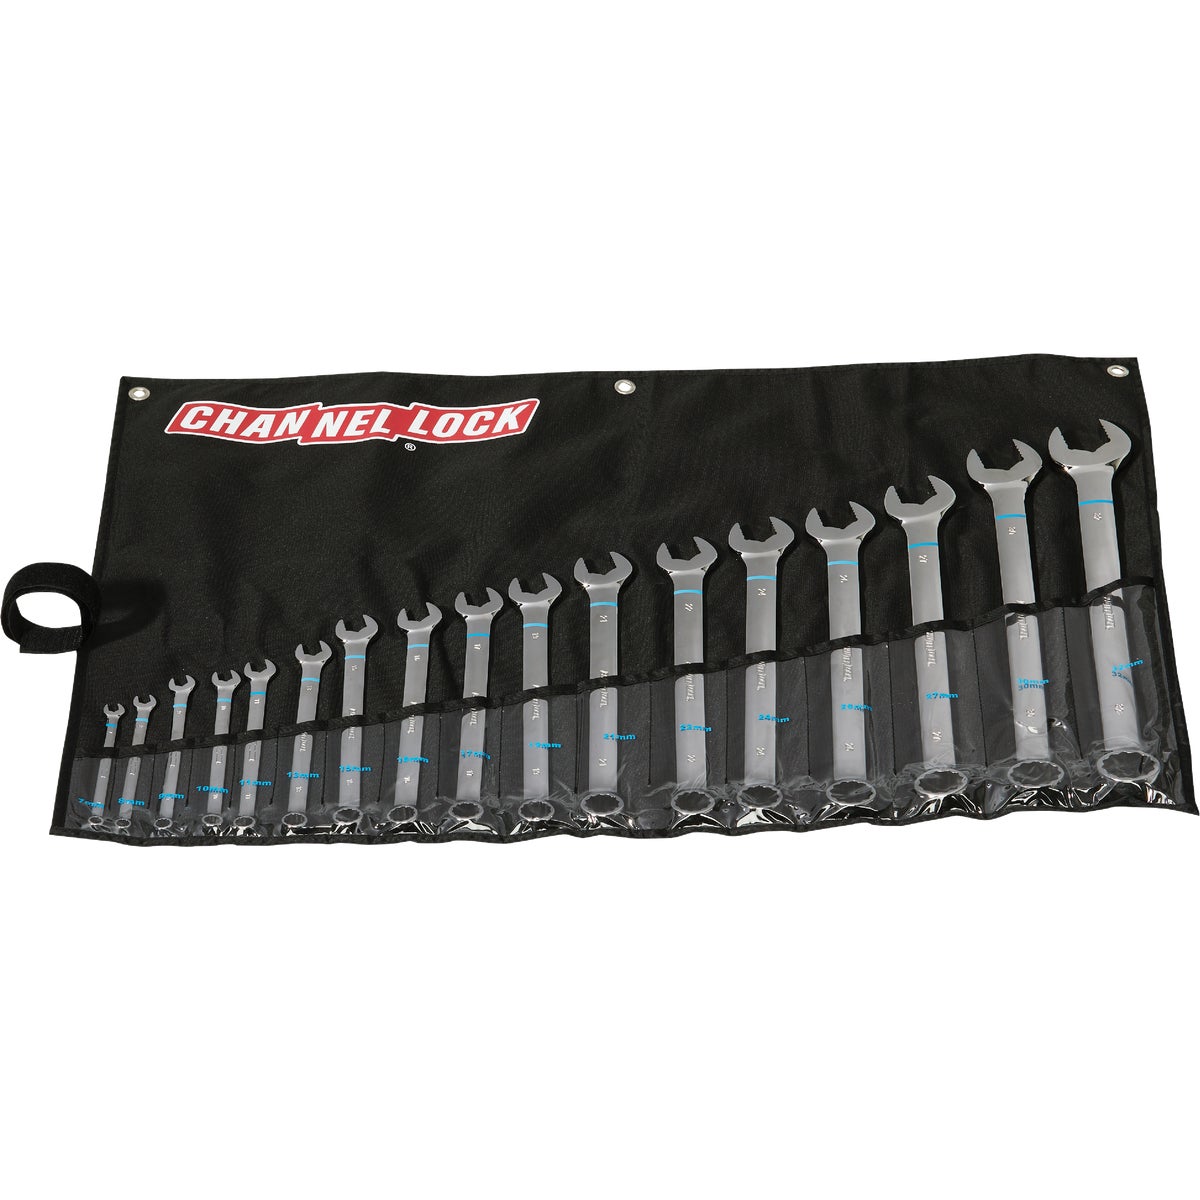 Channellock Metric 12-Point Extra-Long Combination Wrench Set (17-Piece)